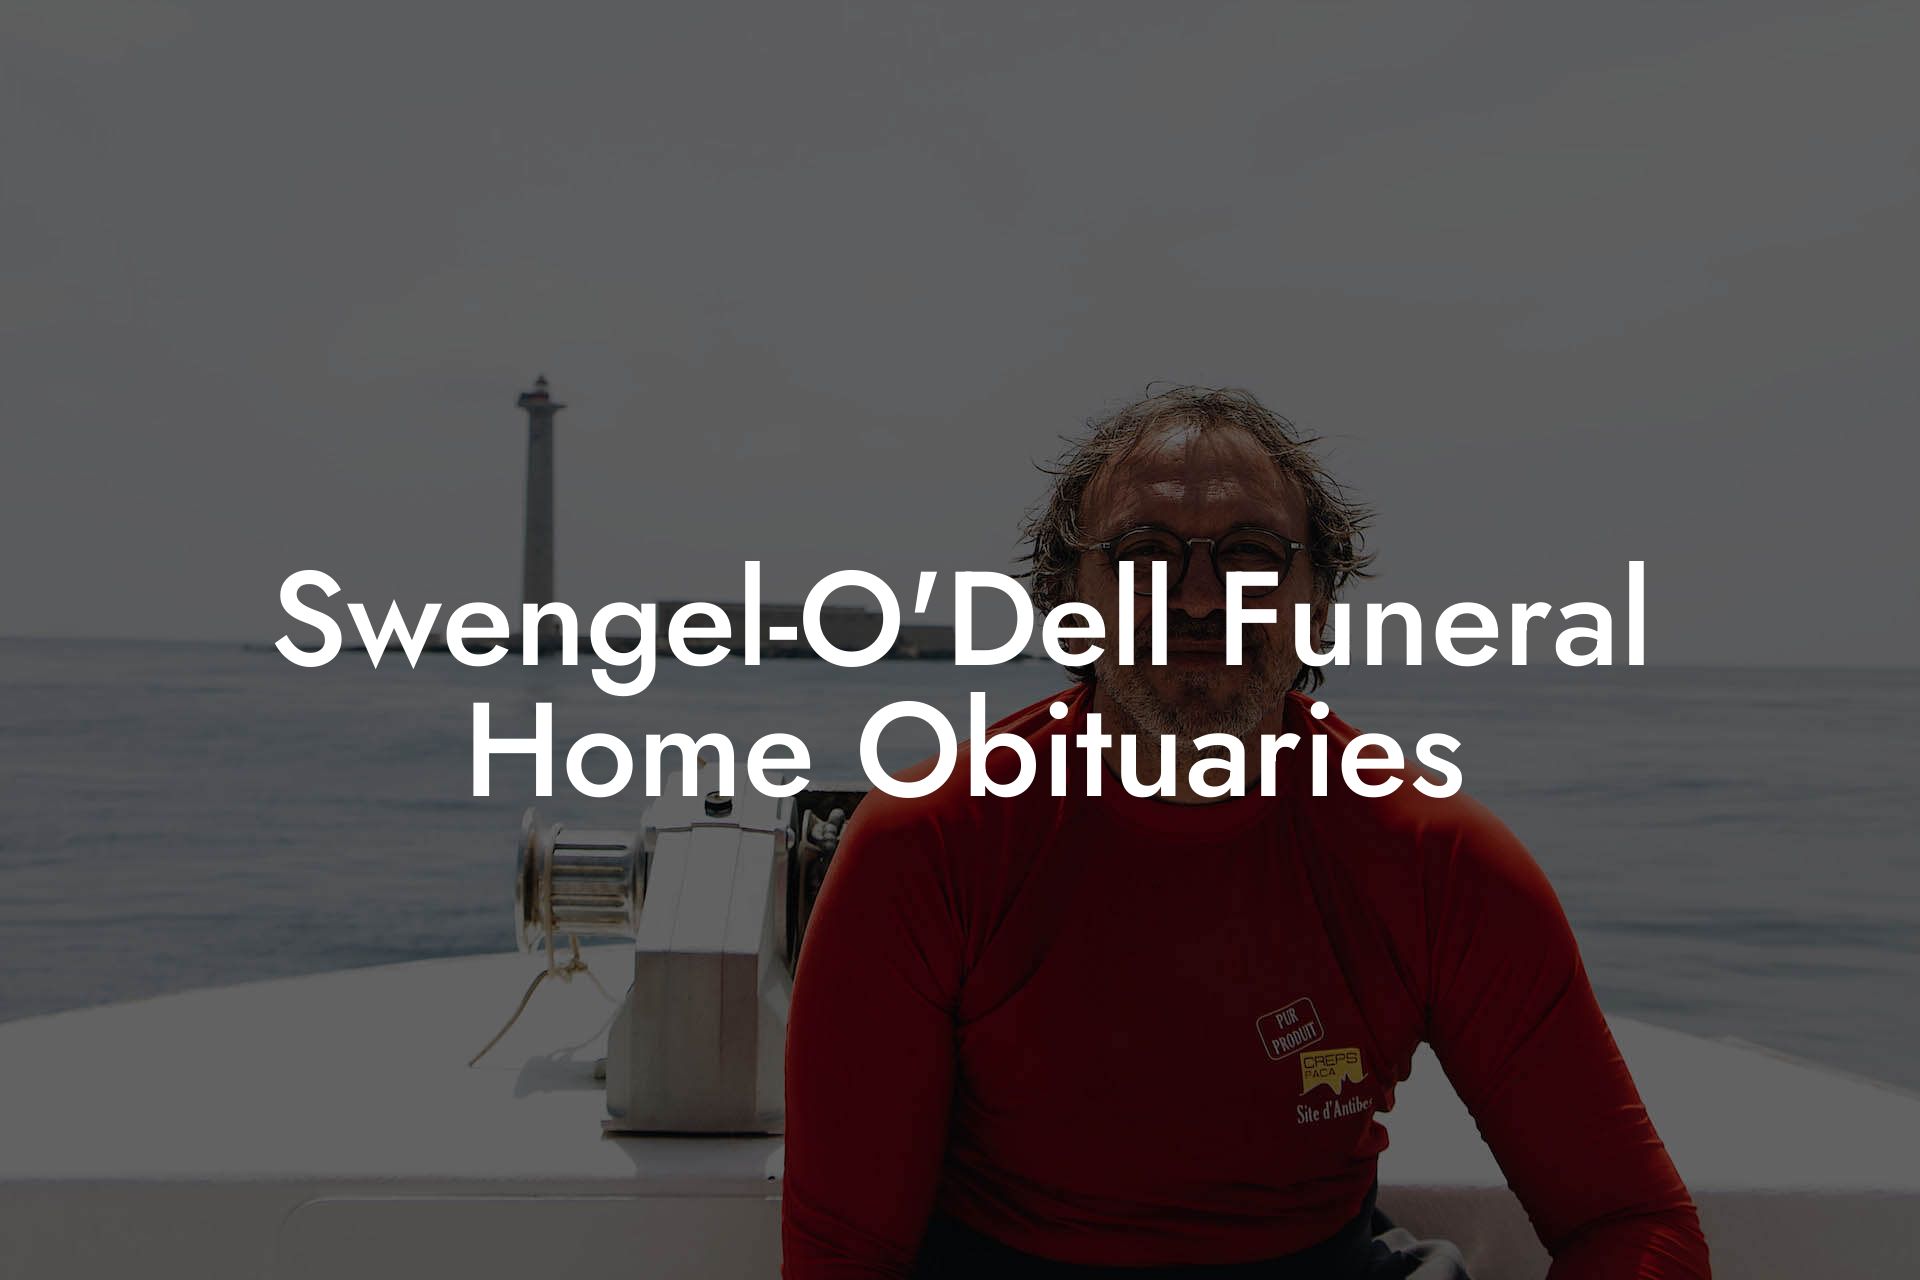 Swengel-O'Dell Funeral Home Obituaries